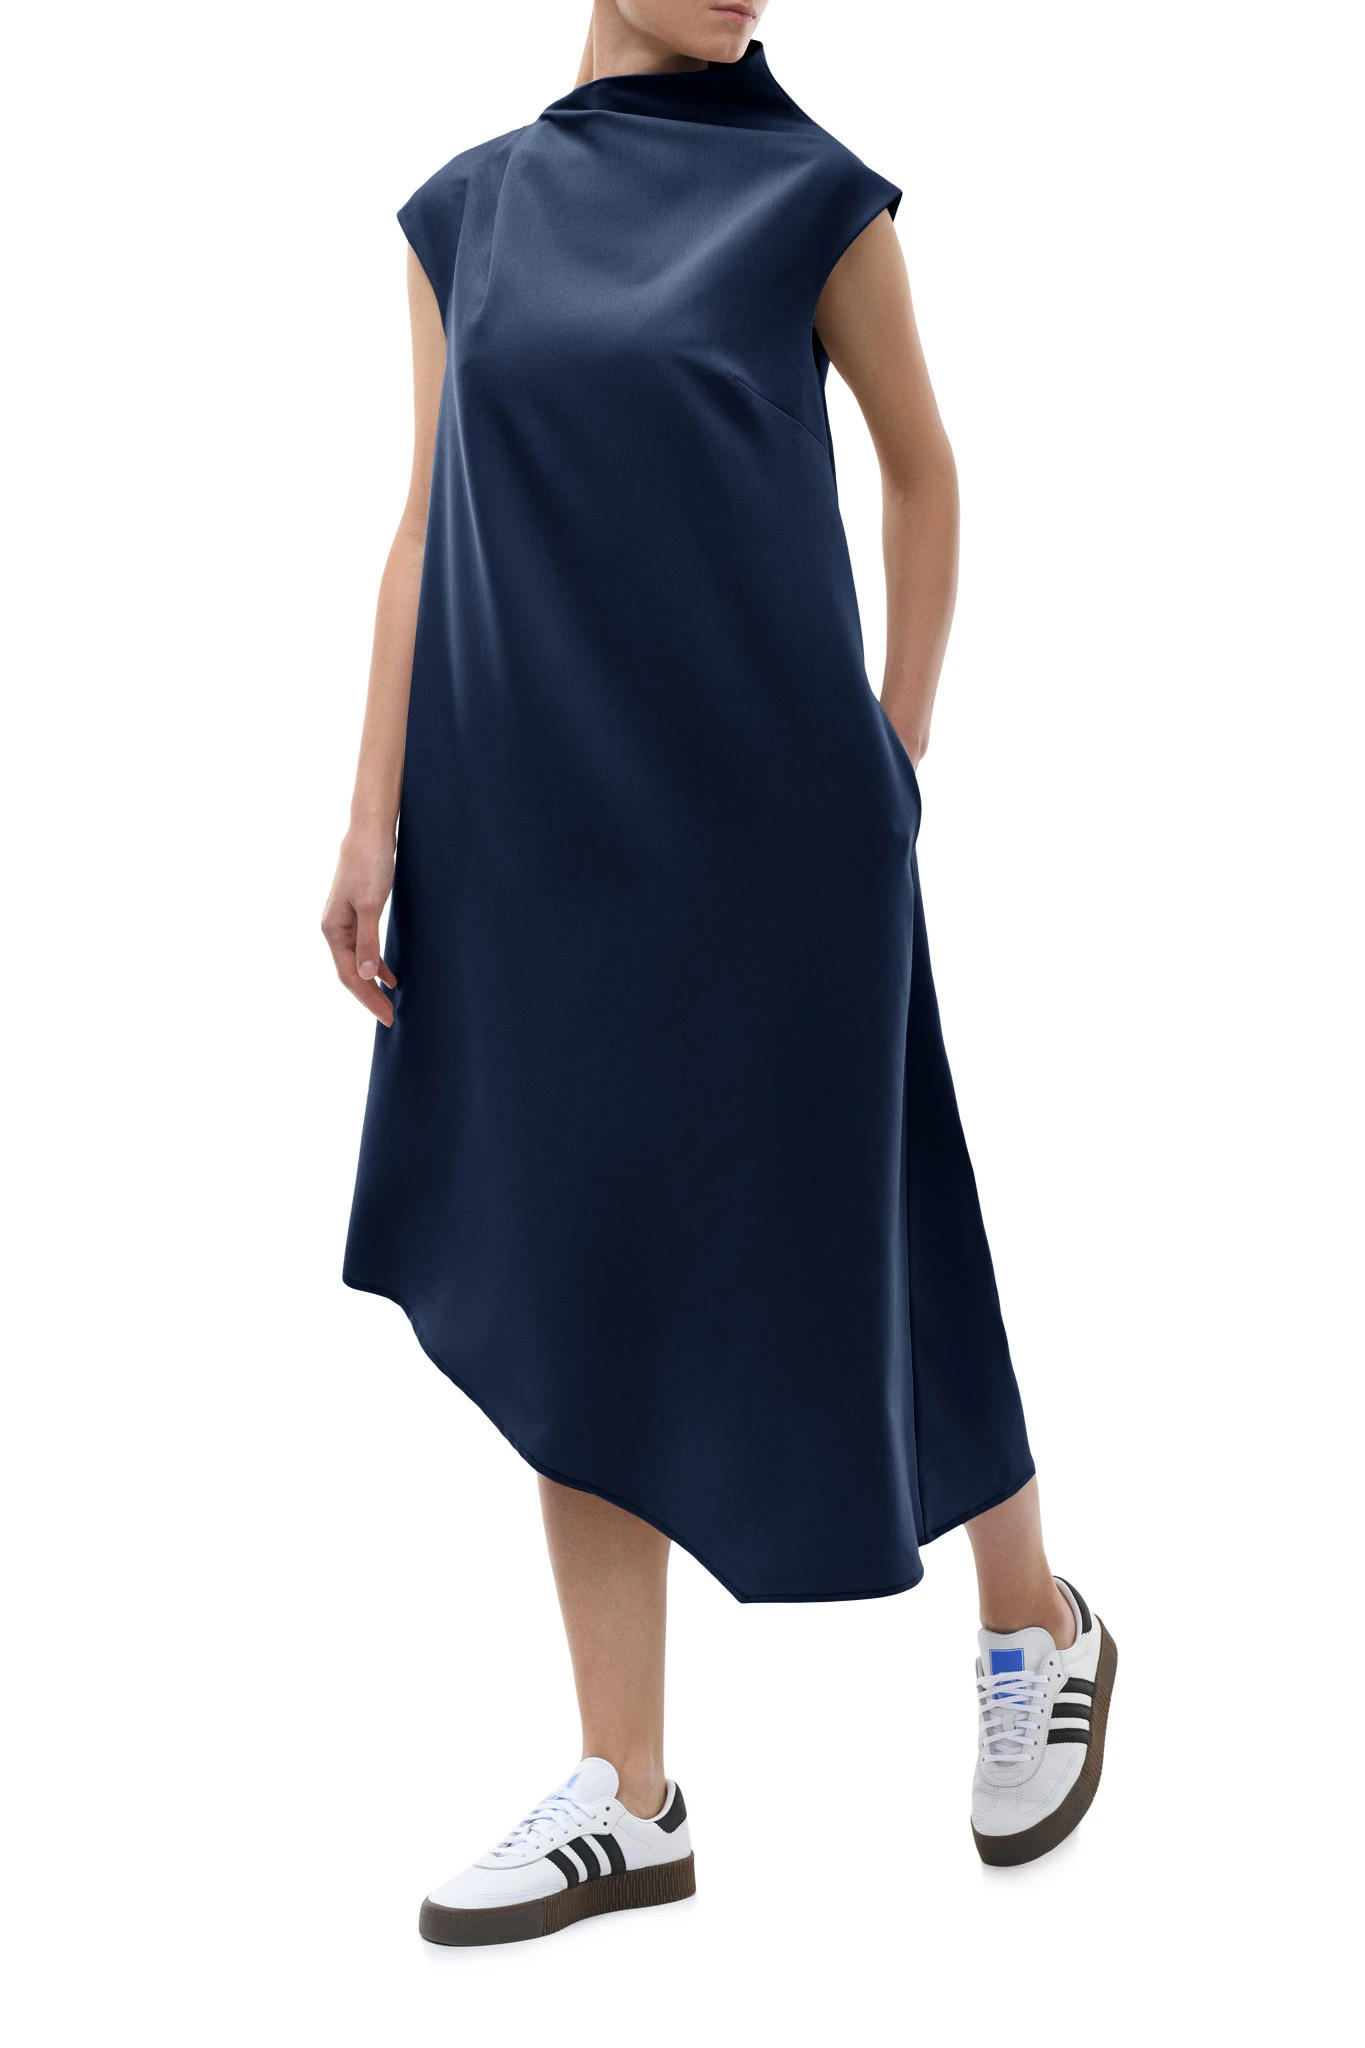 Magda Sleeveless Dress - buy clothes online of emerging designers